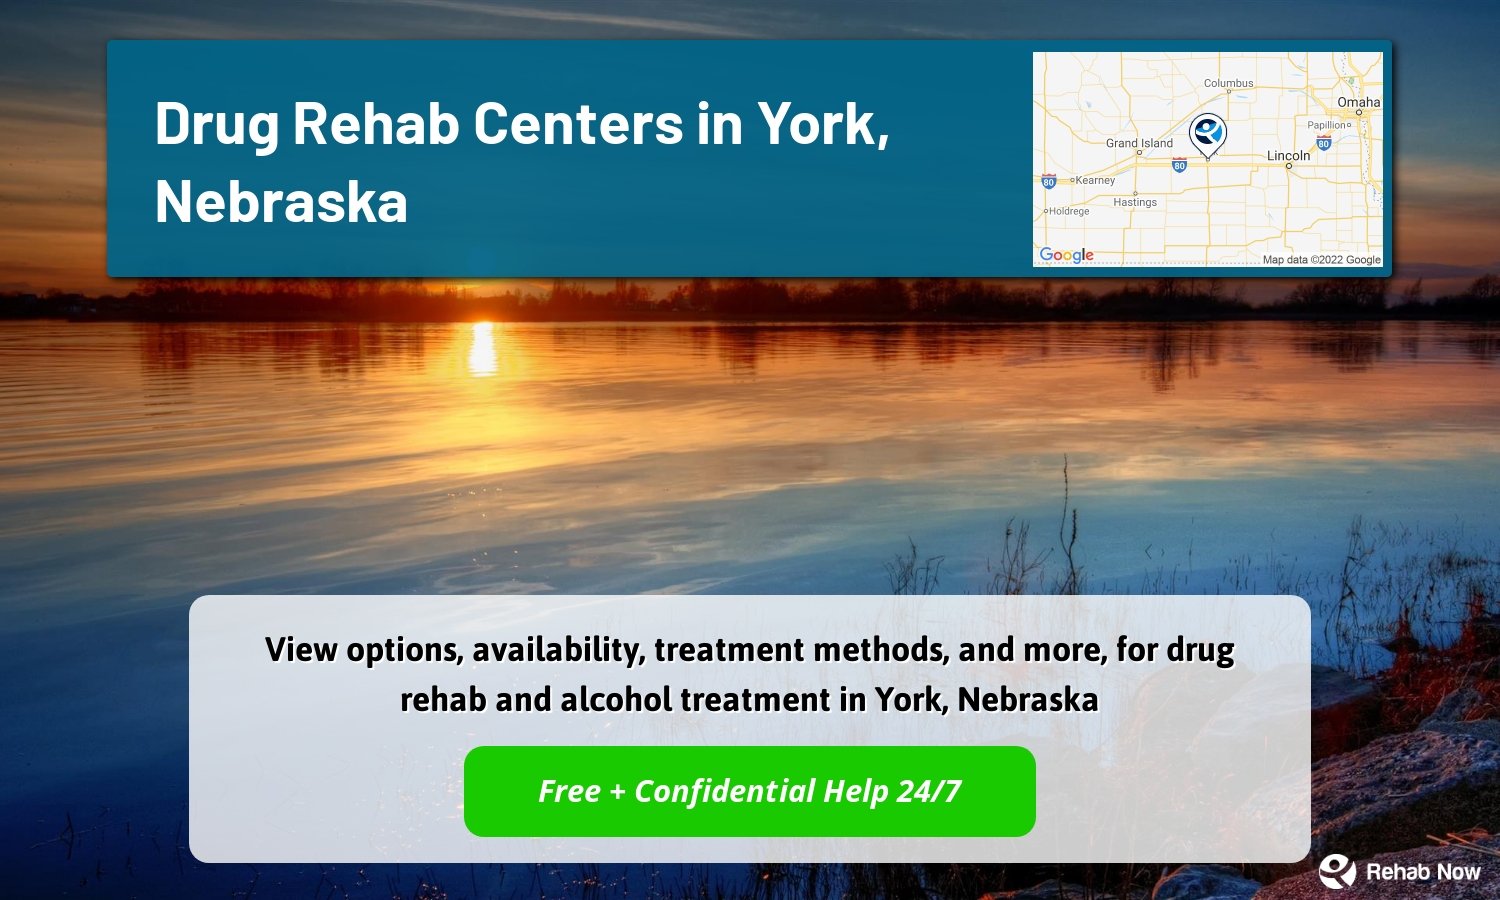 View options, availability, treatment methods, and more, for drug rehab and alcohol treatment in York, Nebraska